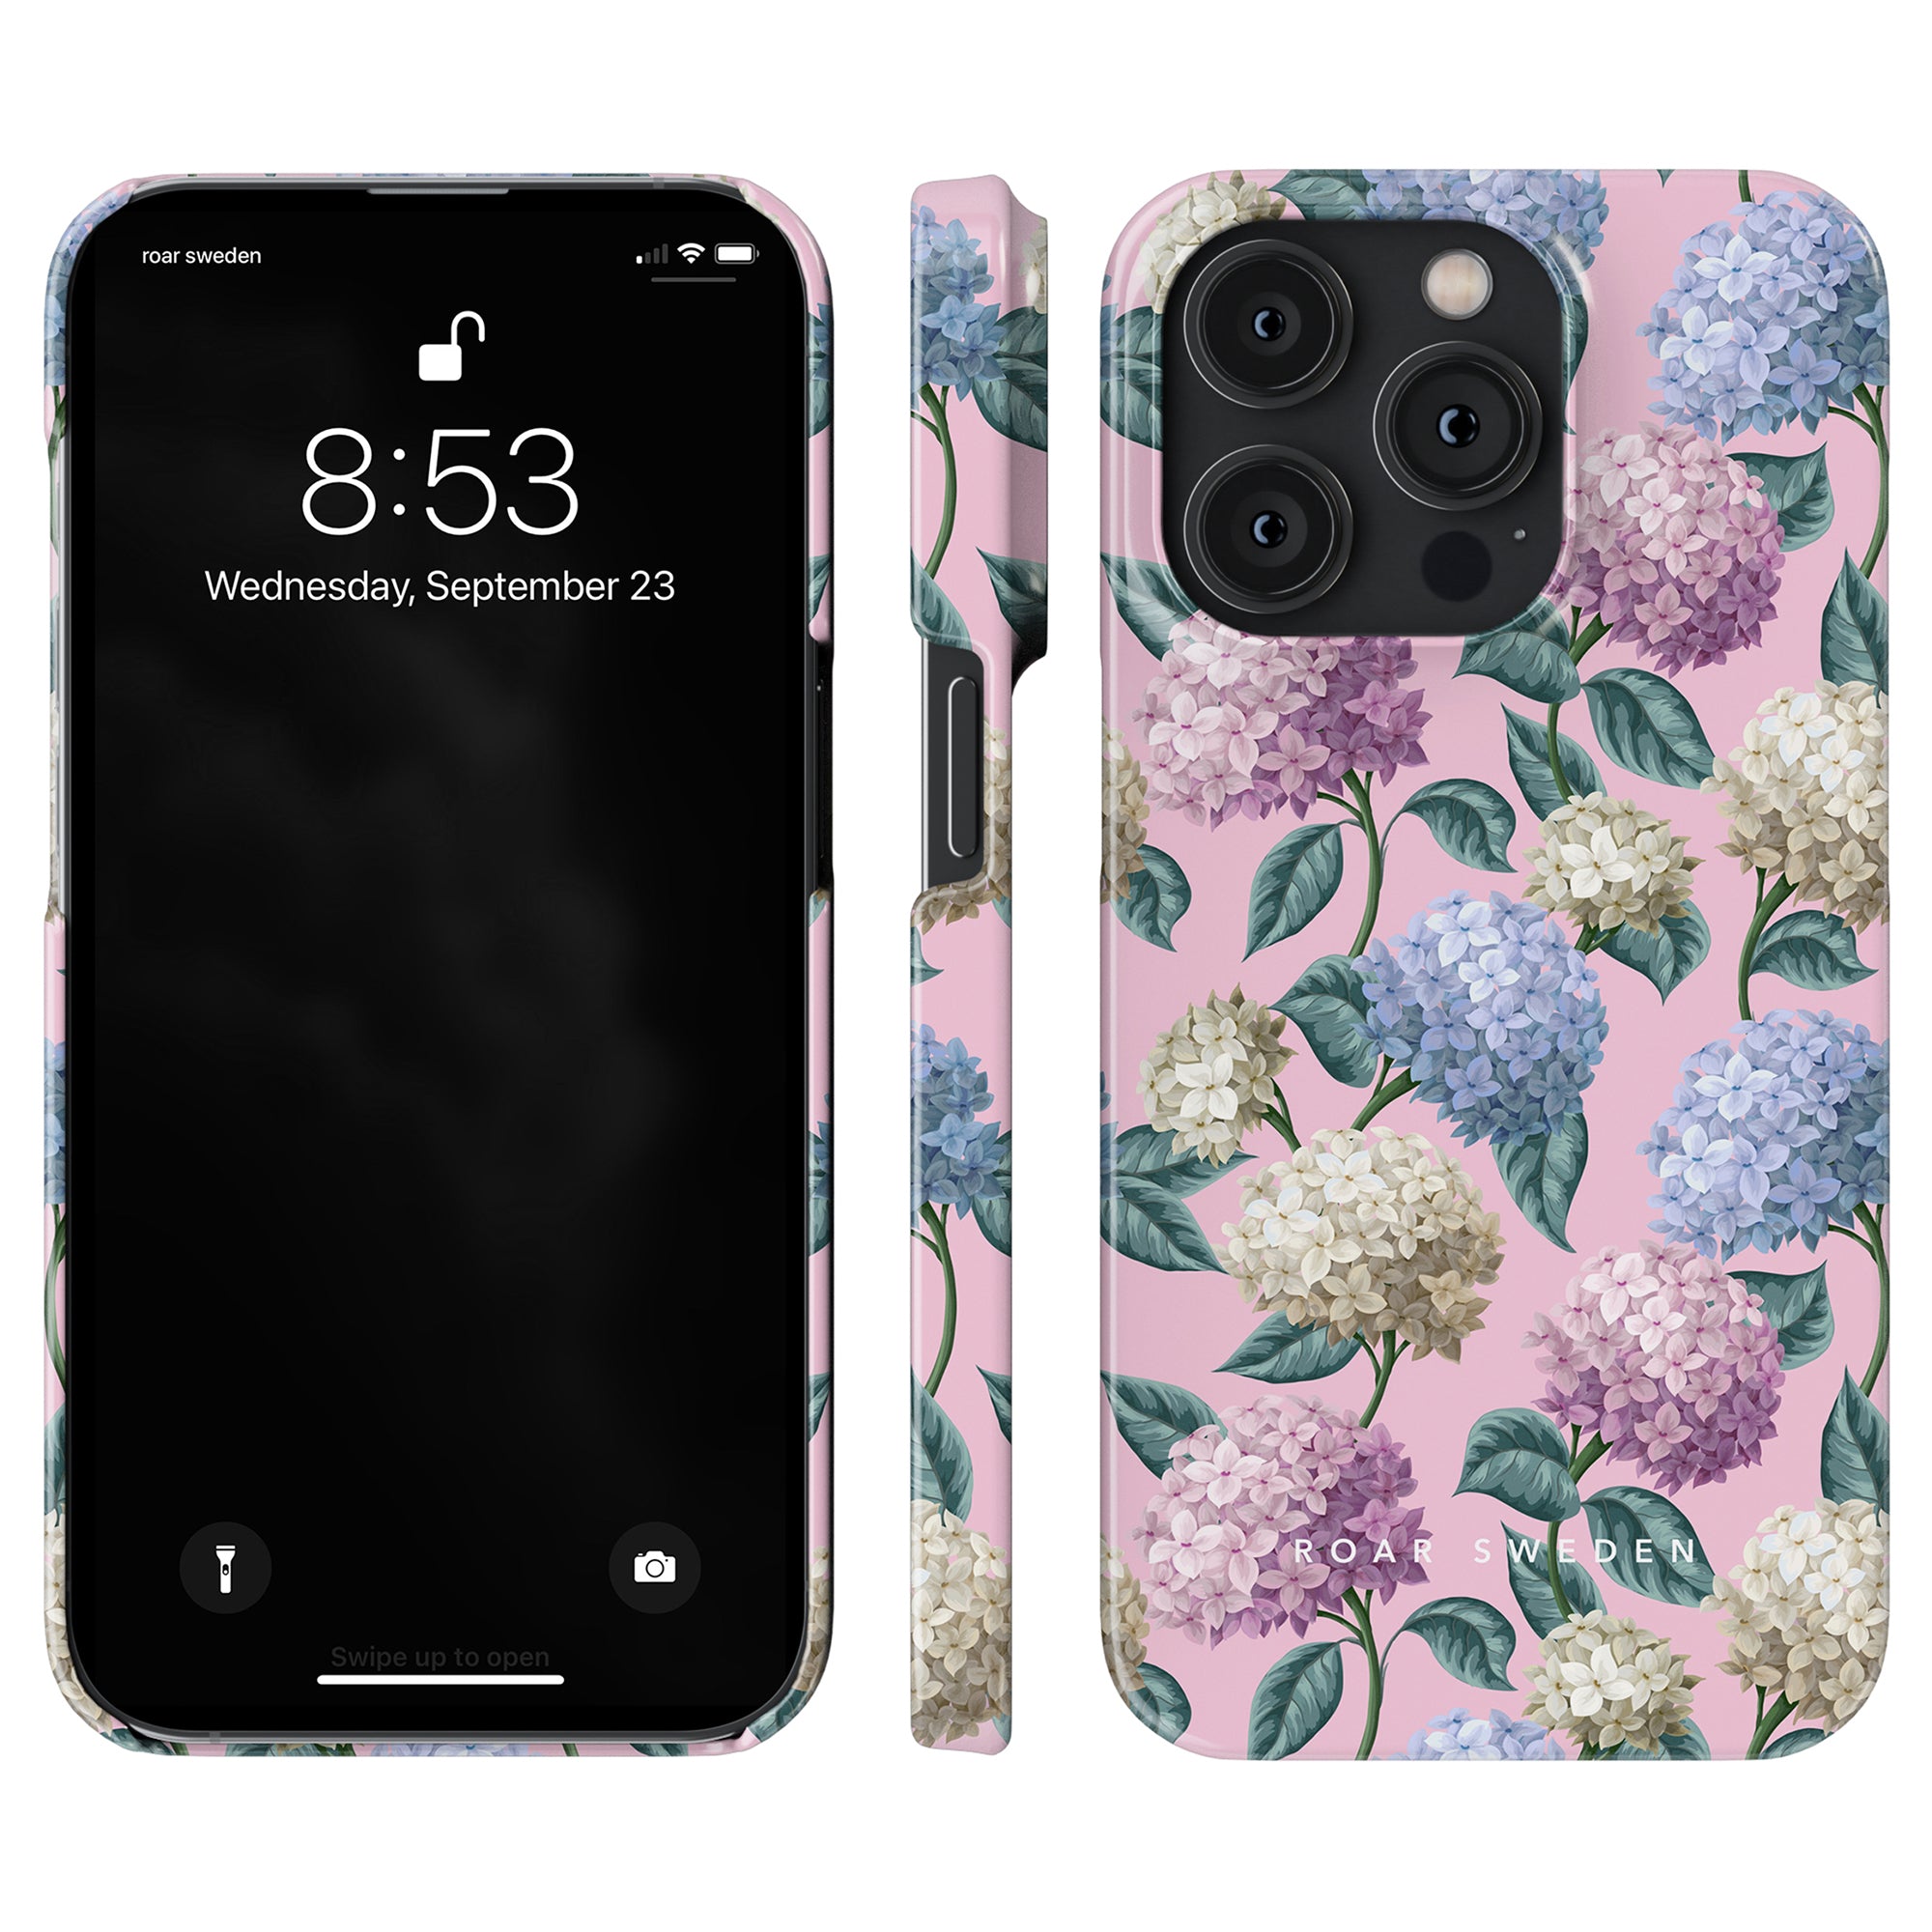 A smartphone with a black screen displaying 8:53 on Wednesday, September 23, beside the Hydrangea - Slim case—a beautiful part of the sommarkollektion featuring a pink background adorned with blue, purple, and white hortensiablomma.